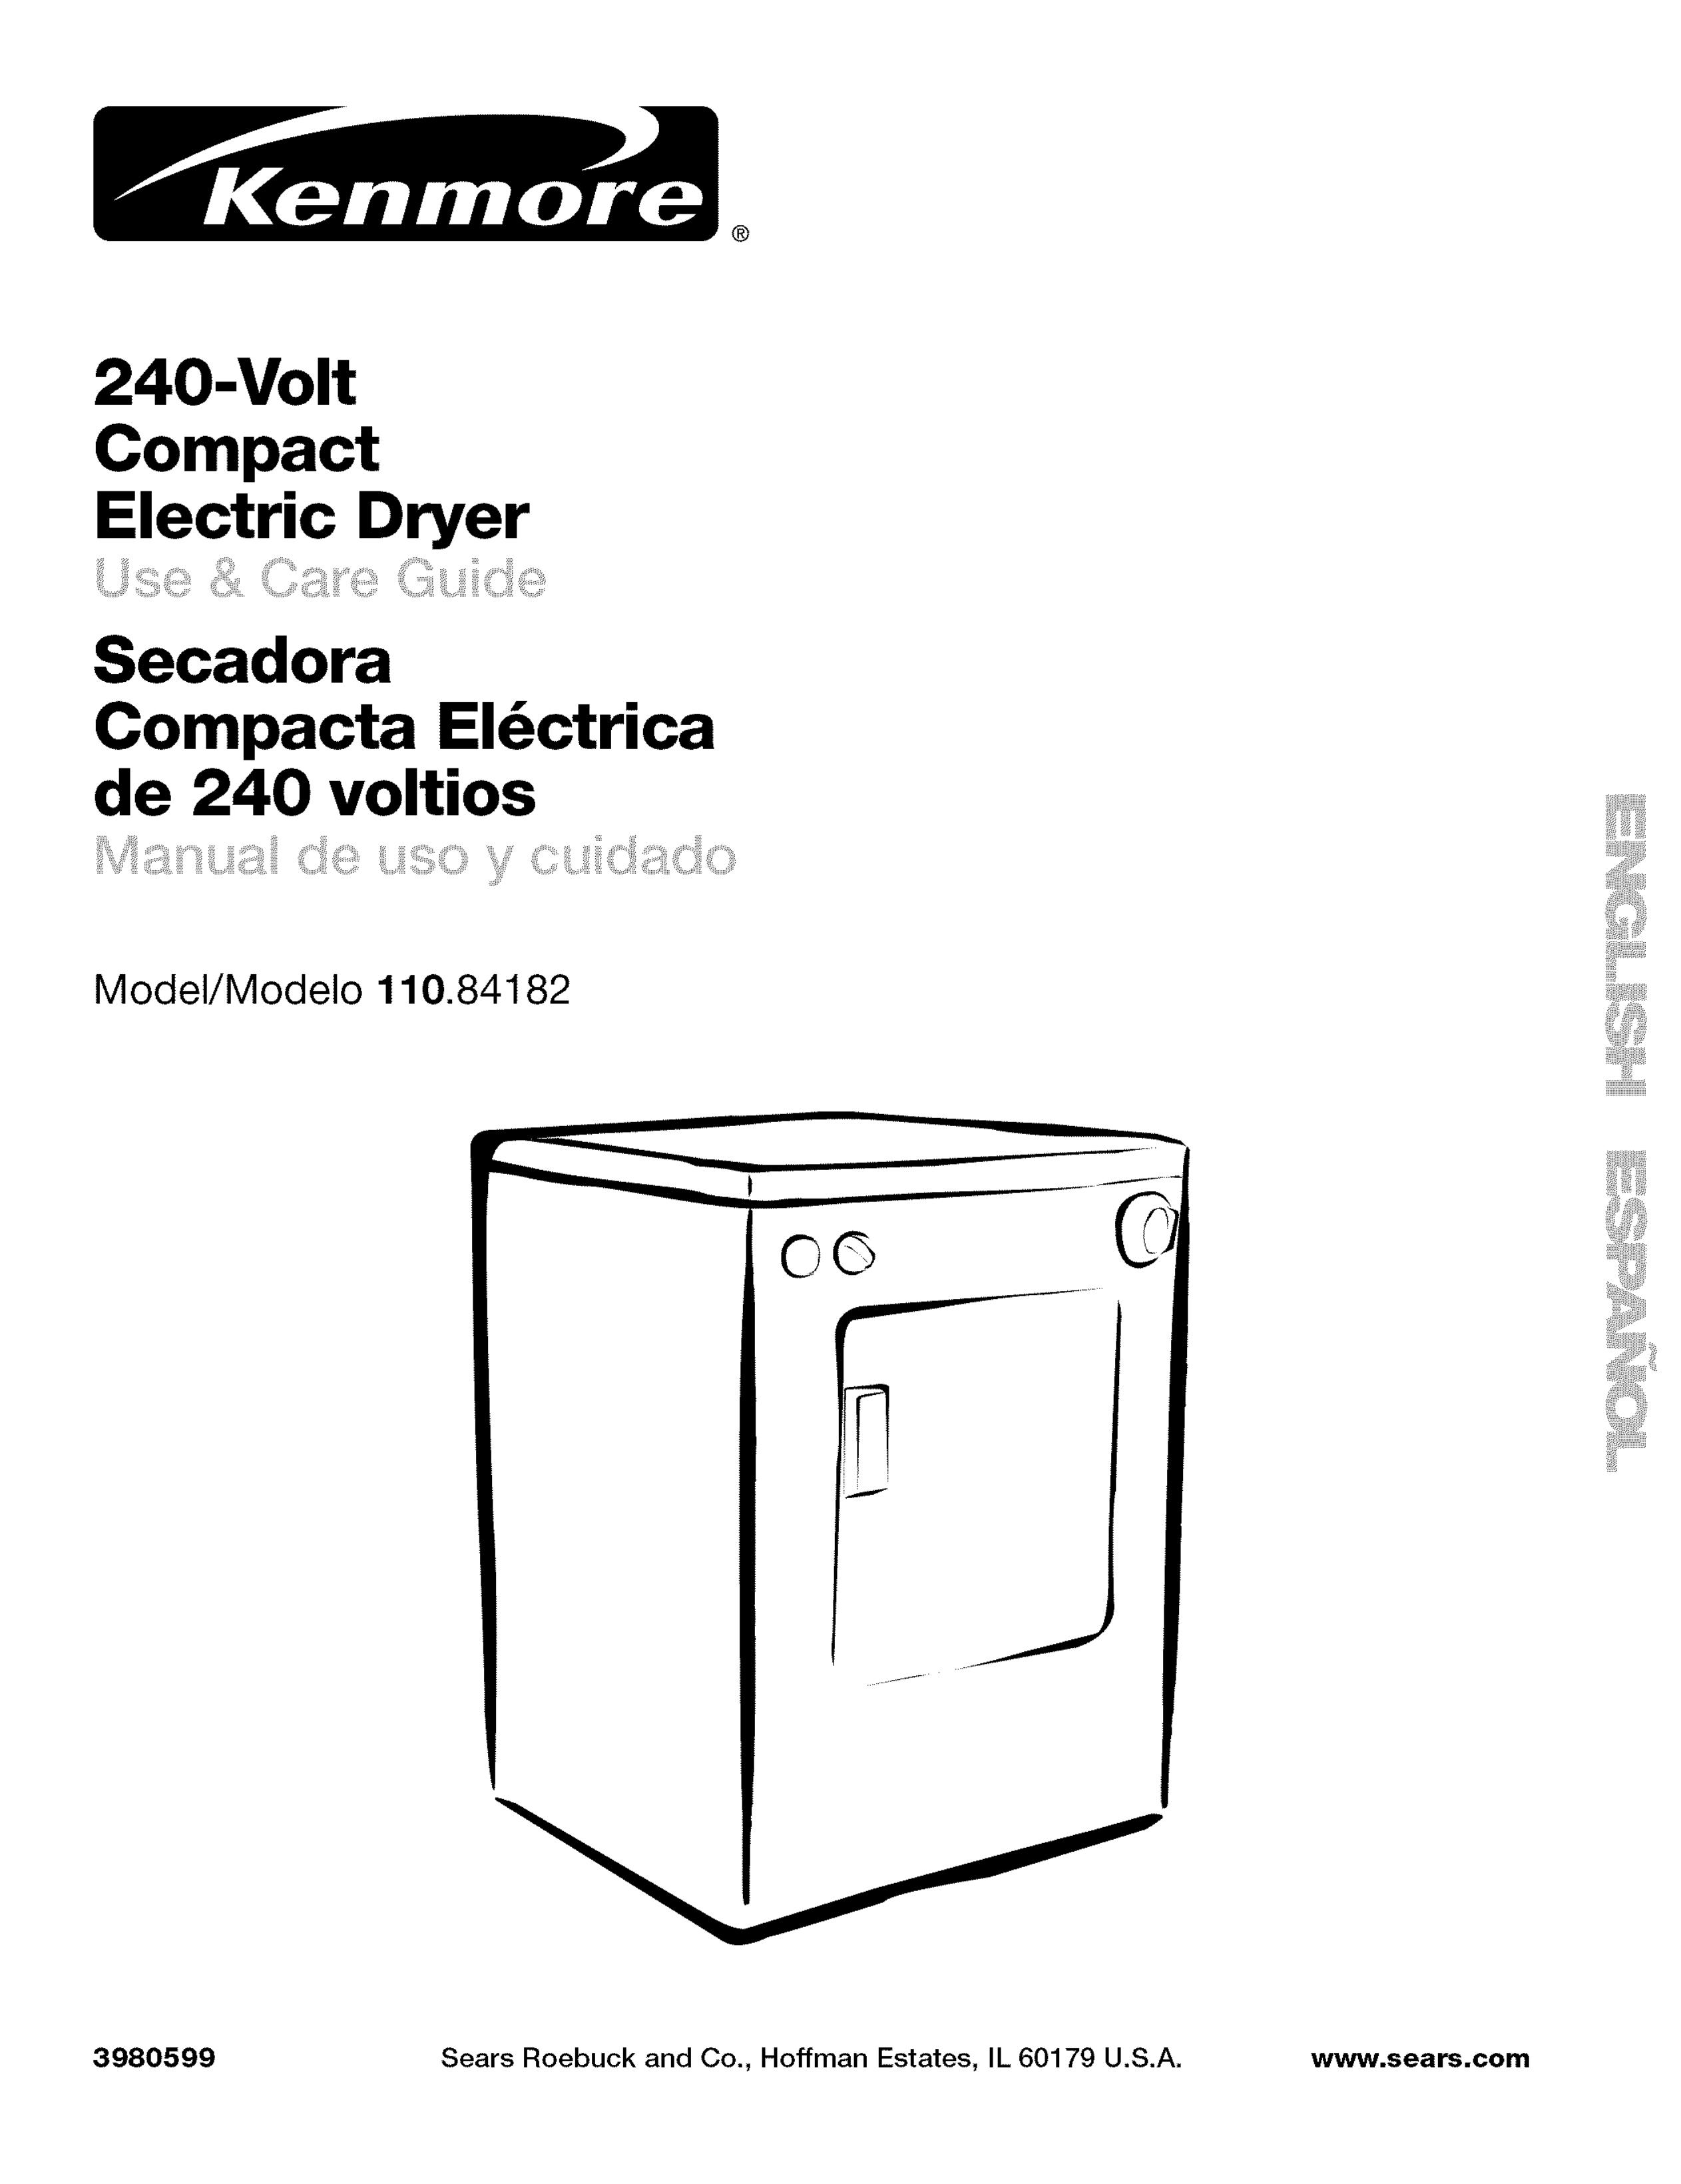 Kenmore 240-Volt Compact Electric Dryer Clothes Dryer User Manual